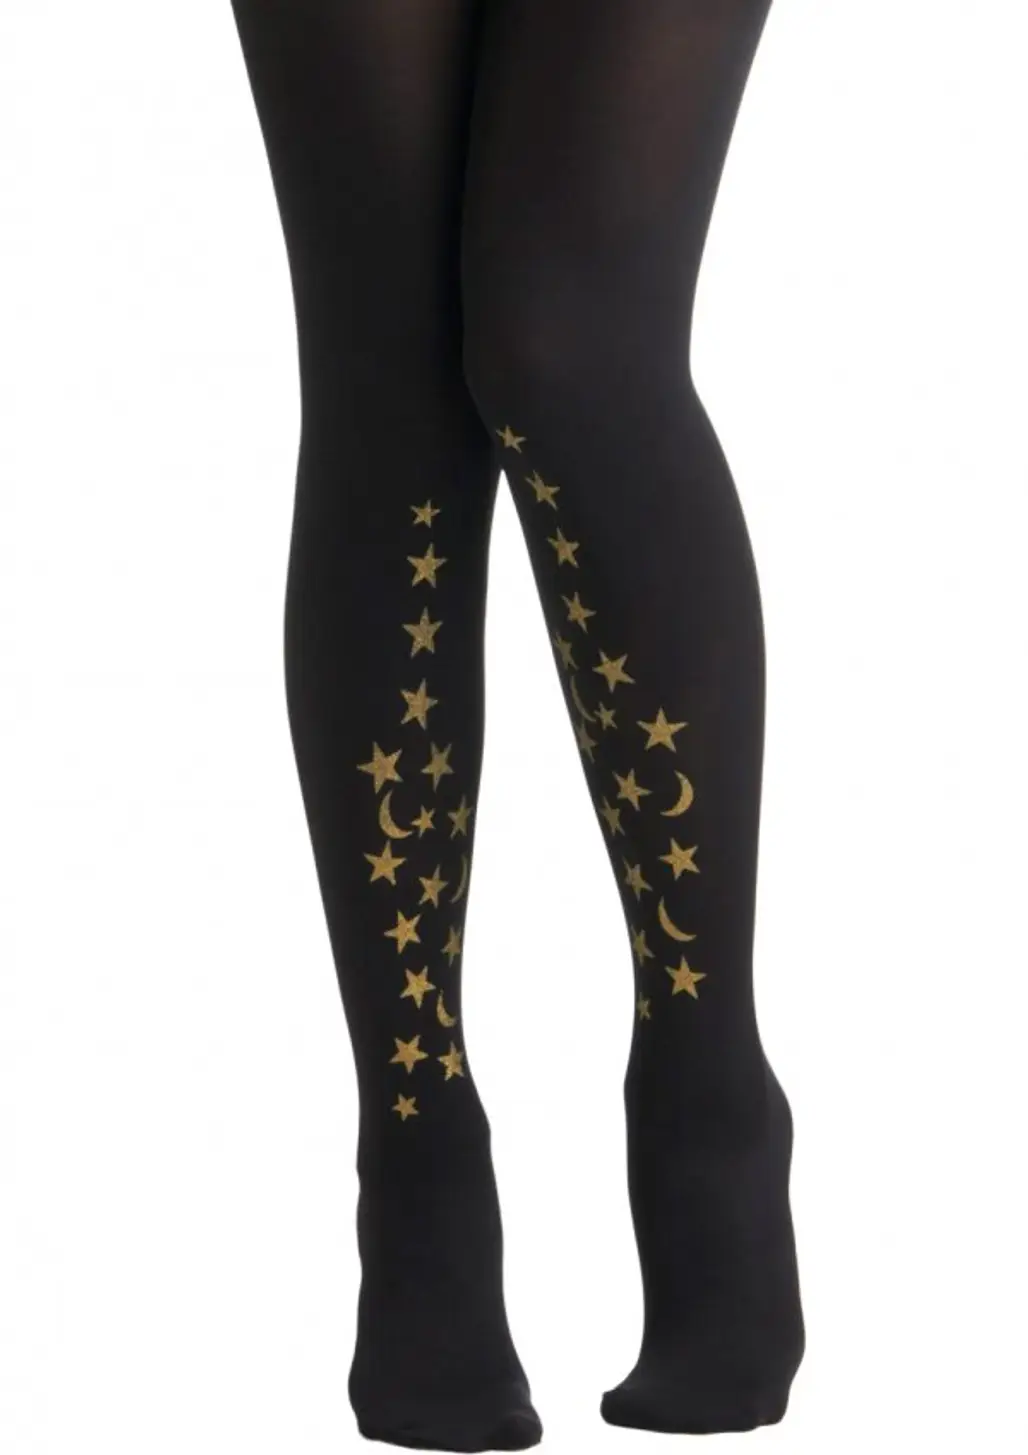 Black with a Gold Celestial Design